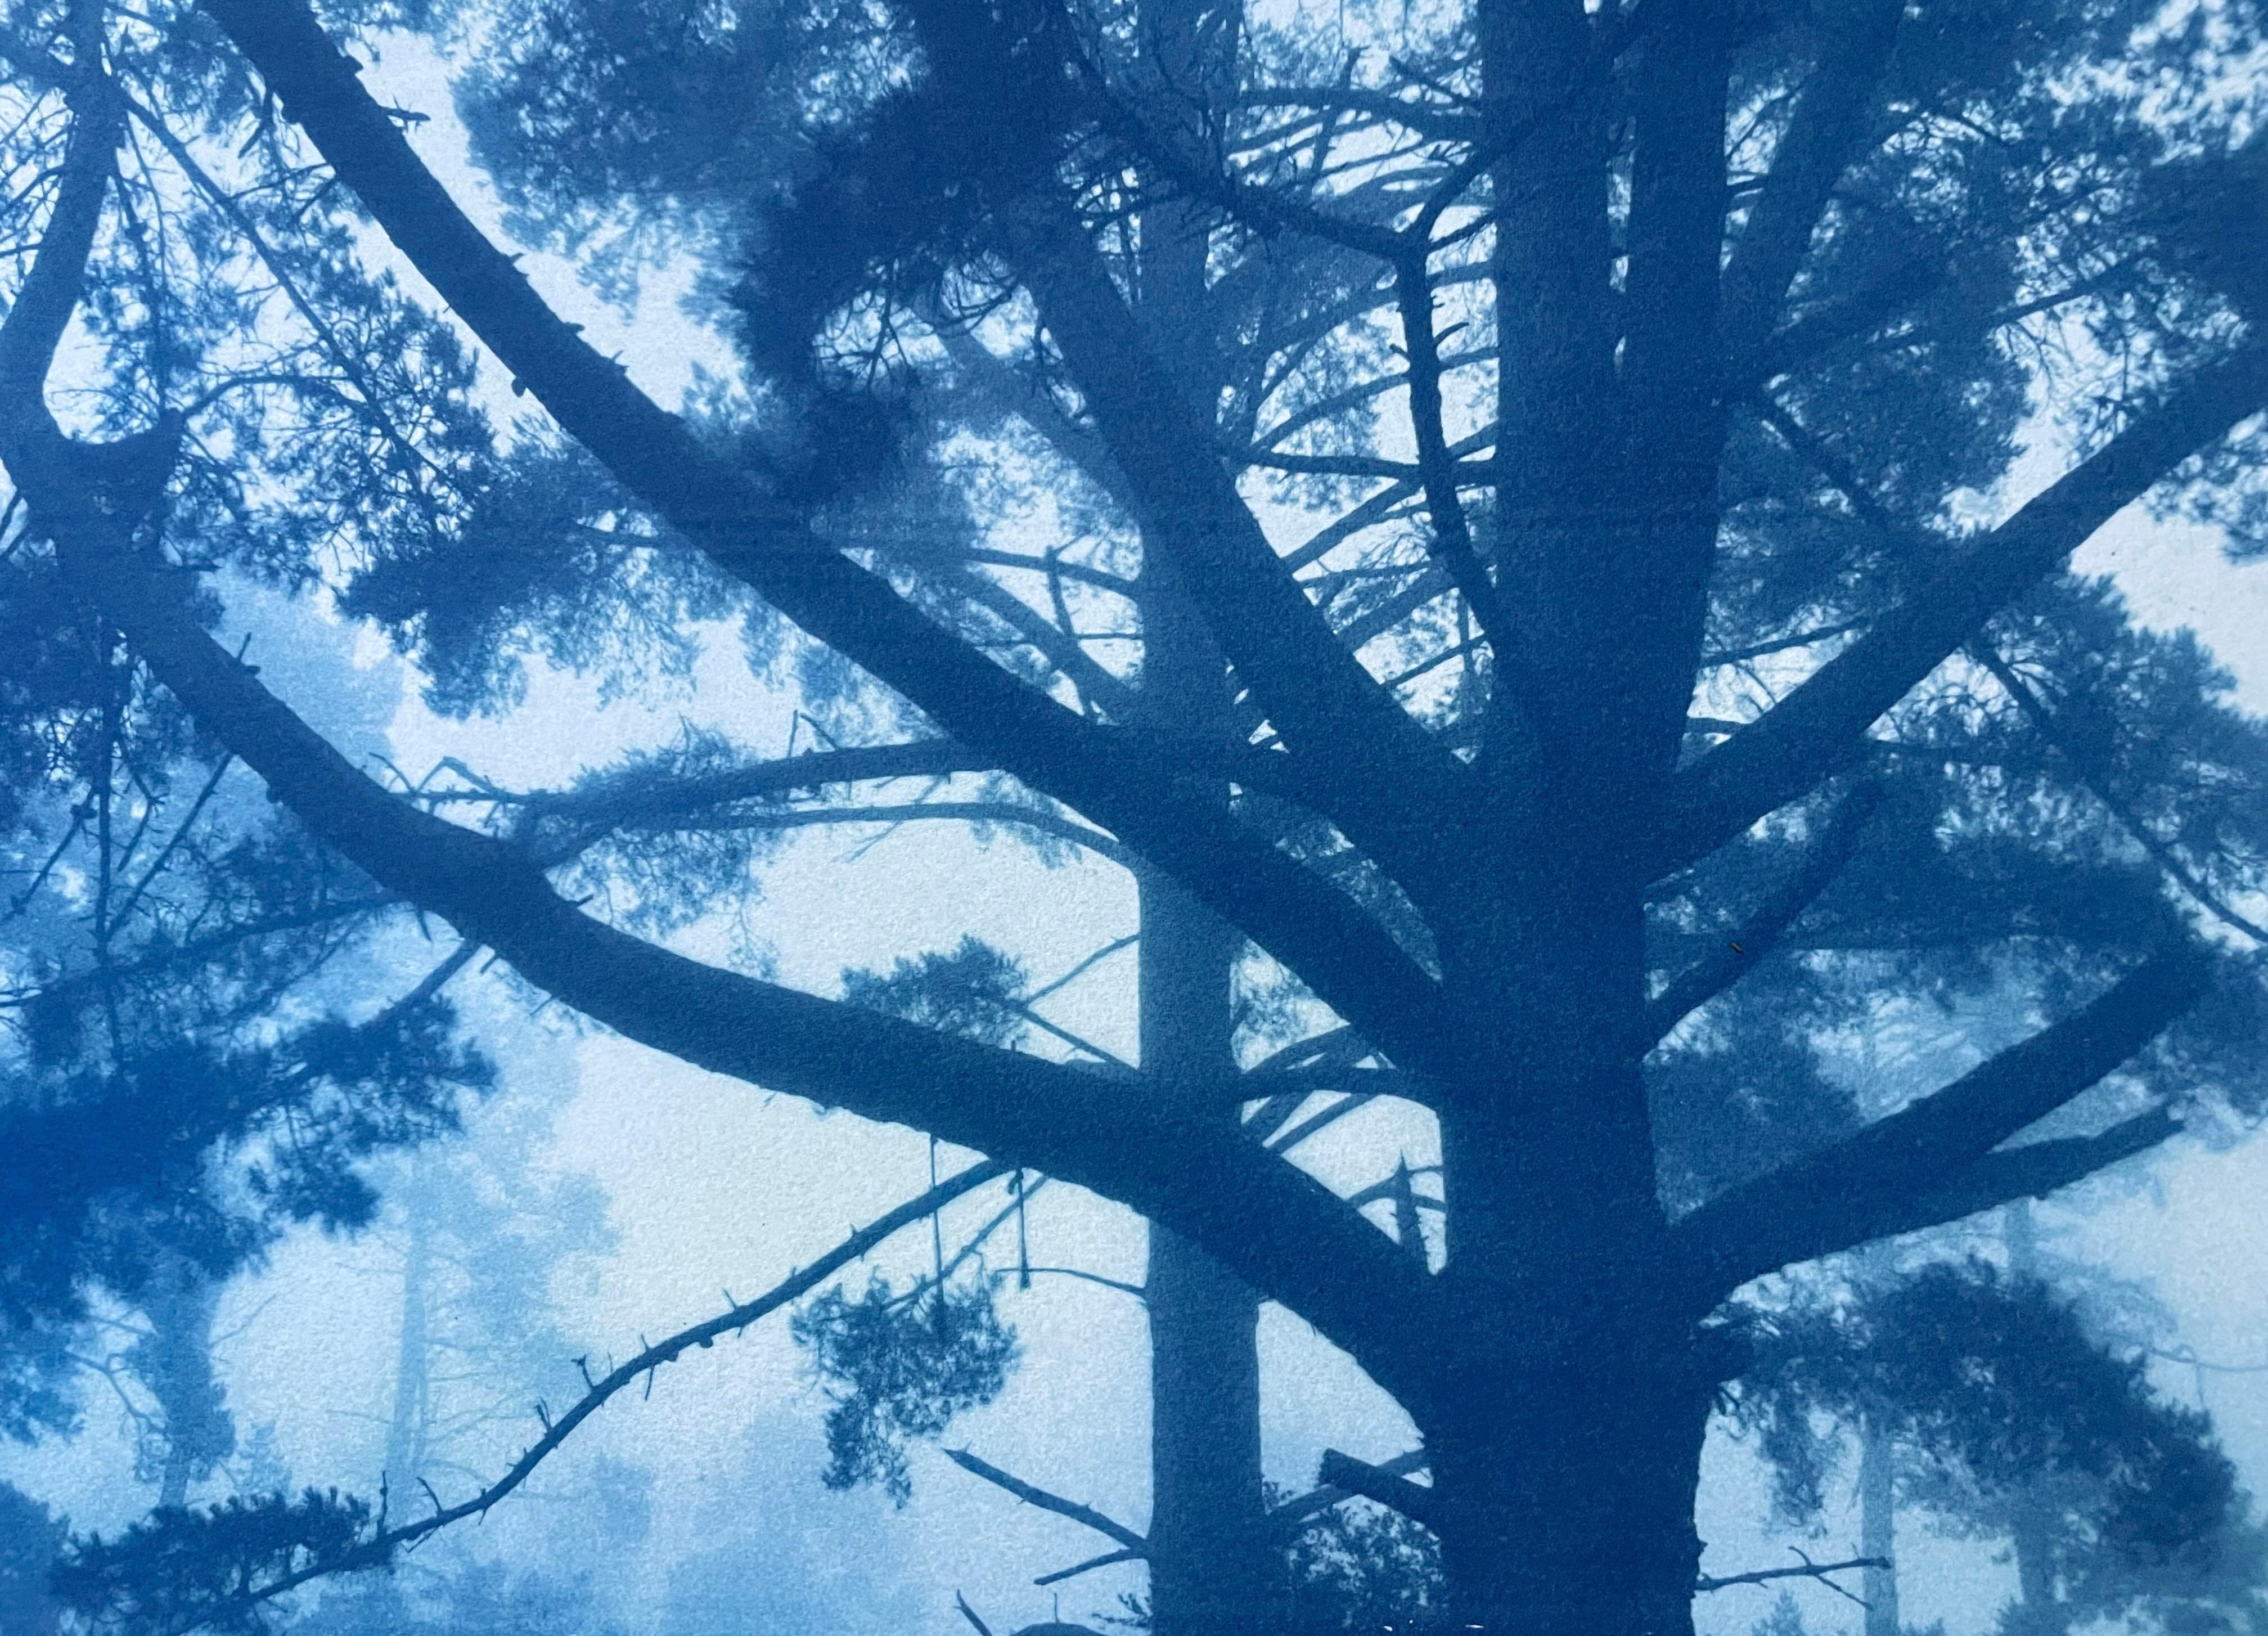 Forest Sunrise (Hand-printed cyanotype, 18 x 24 inches) - Print by Christine So